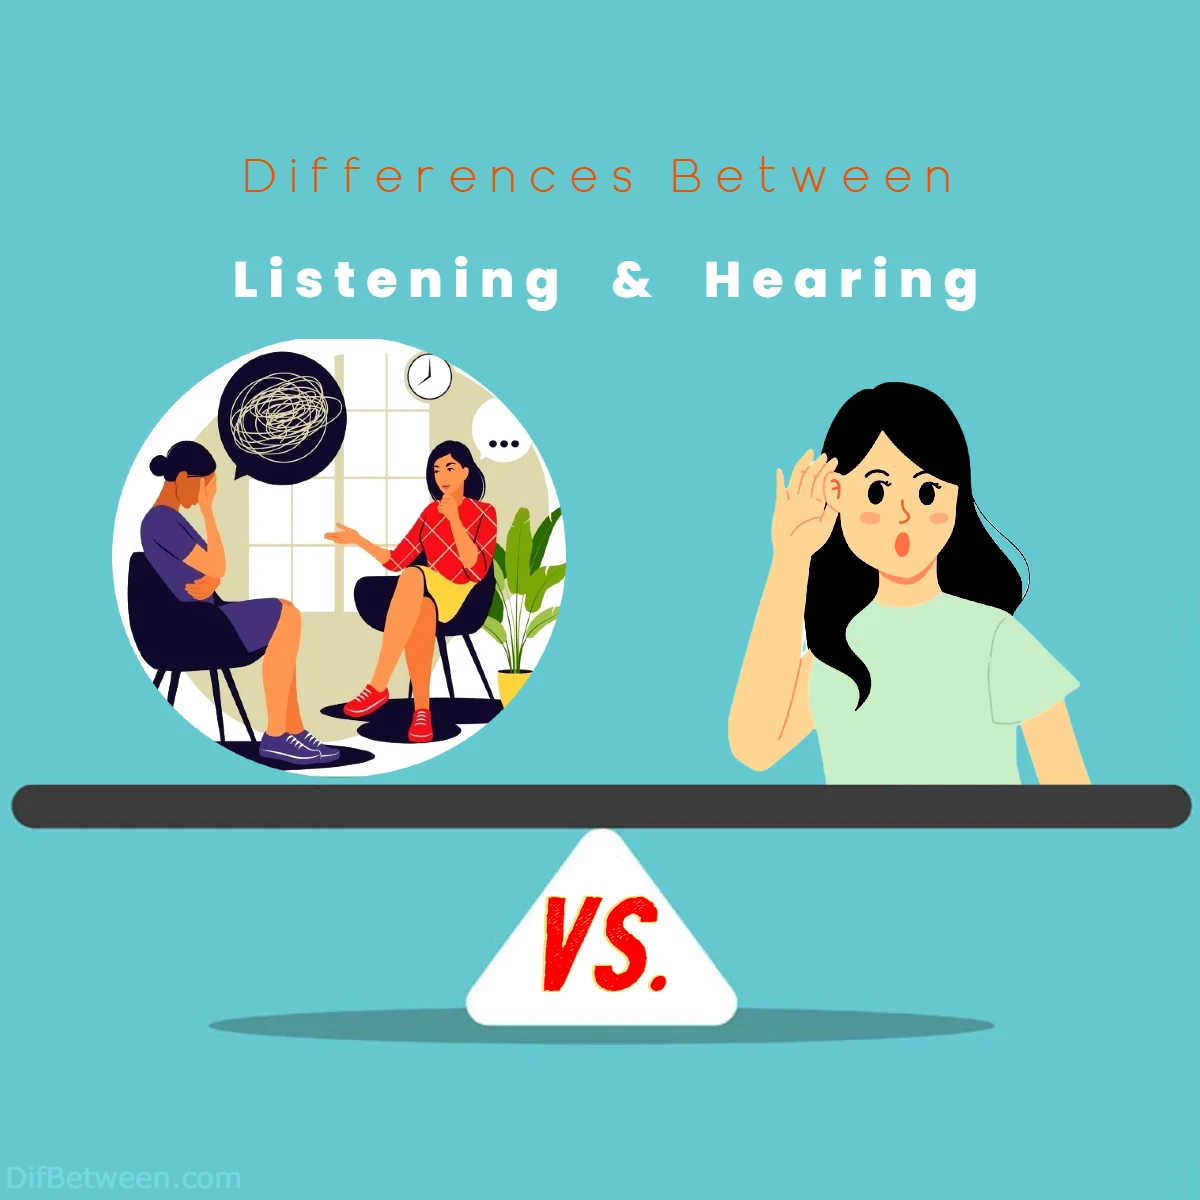 Differences Between Listening vs Hearing